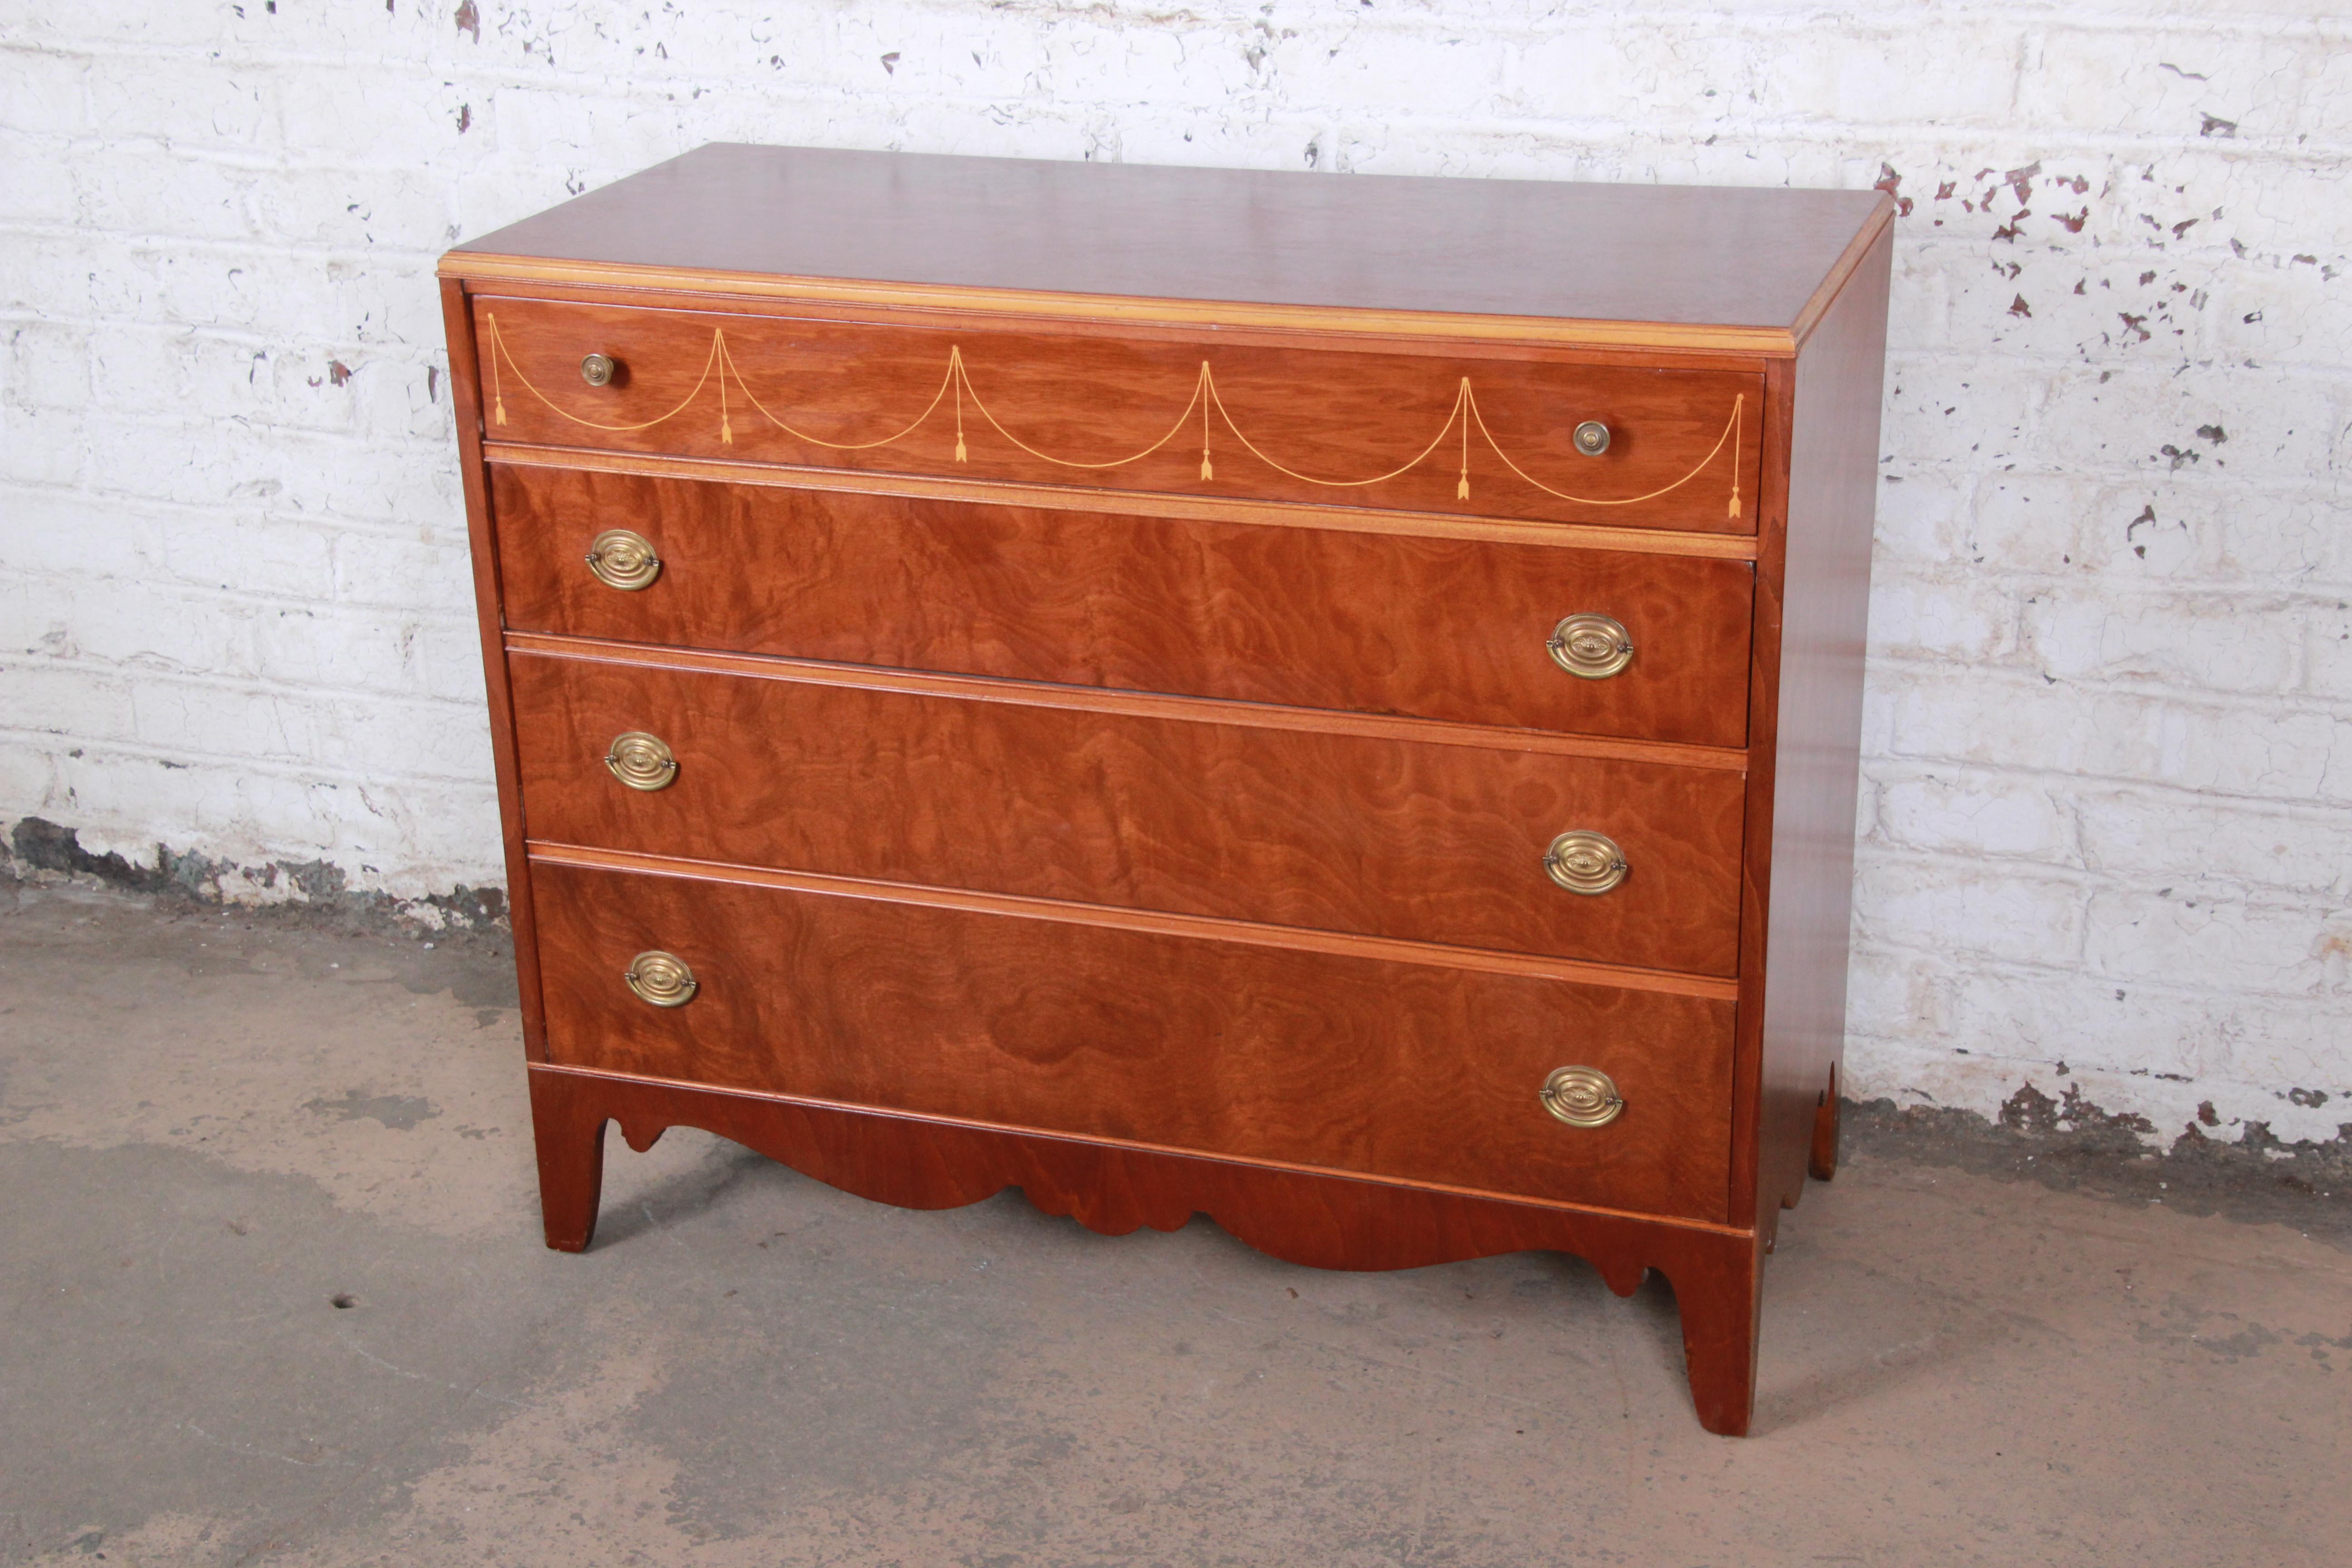 A gorgeous antique mahogany French style dresser by Berkey & Gay, circa 1930s. The dresser features beautiful mahogany wood grain and nice inlaid details. It offers ample storage, with four deep dovetailed drawers. Brass hardware is original, and